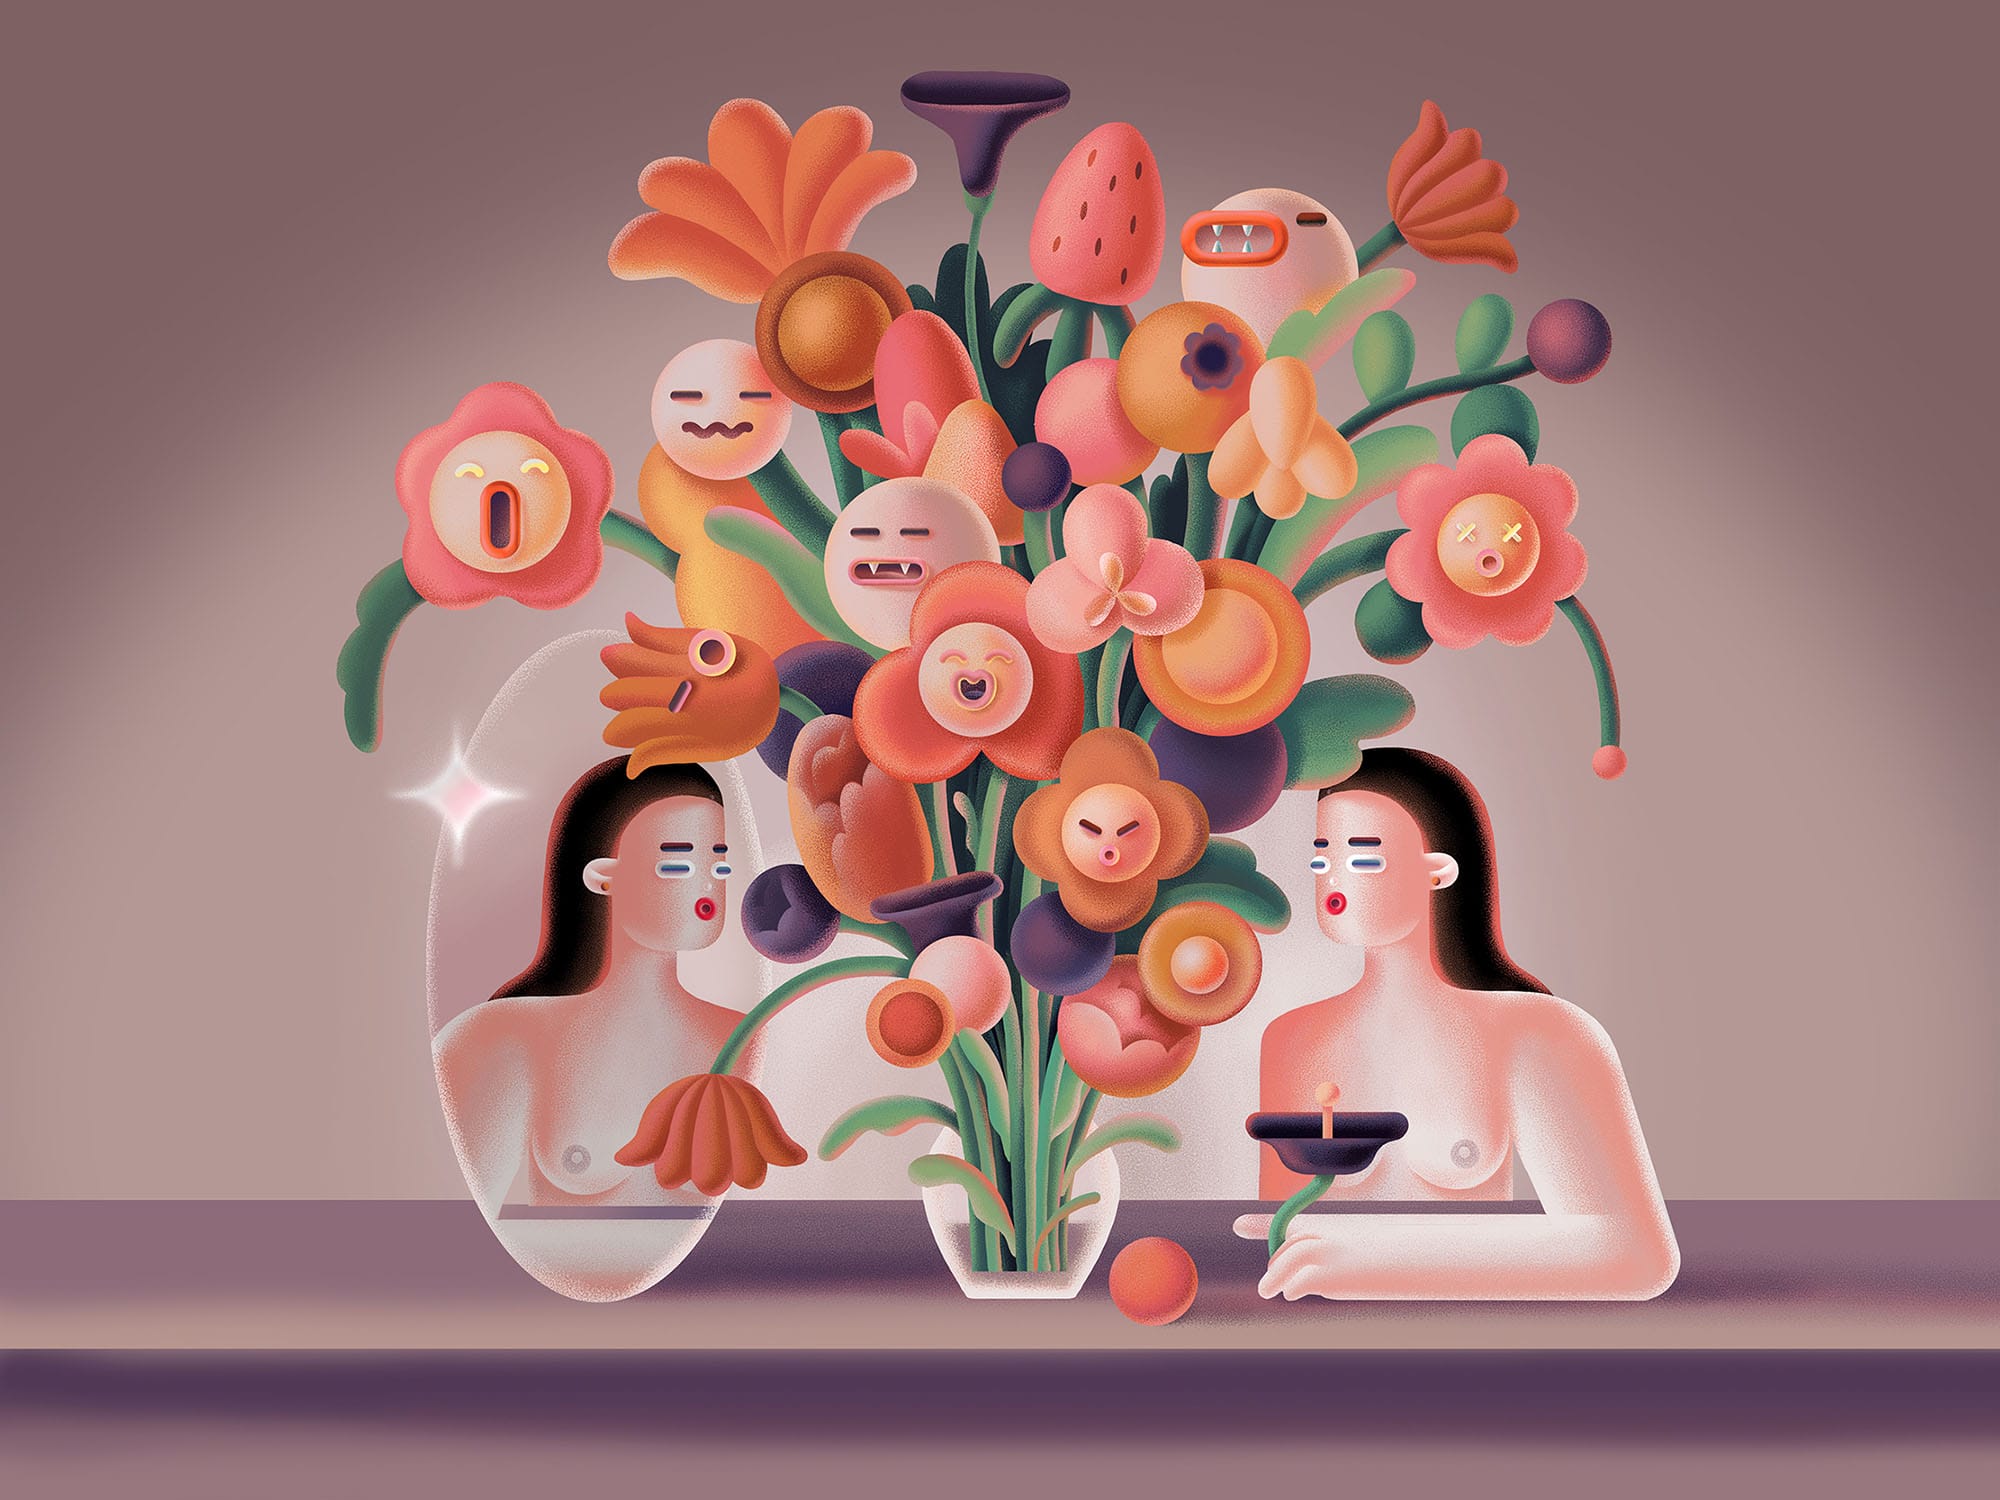 two women sit at a table and admire a large vase of pink and orange flowers. some of the flowers have faces